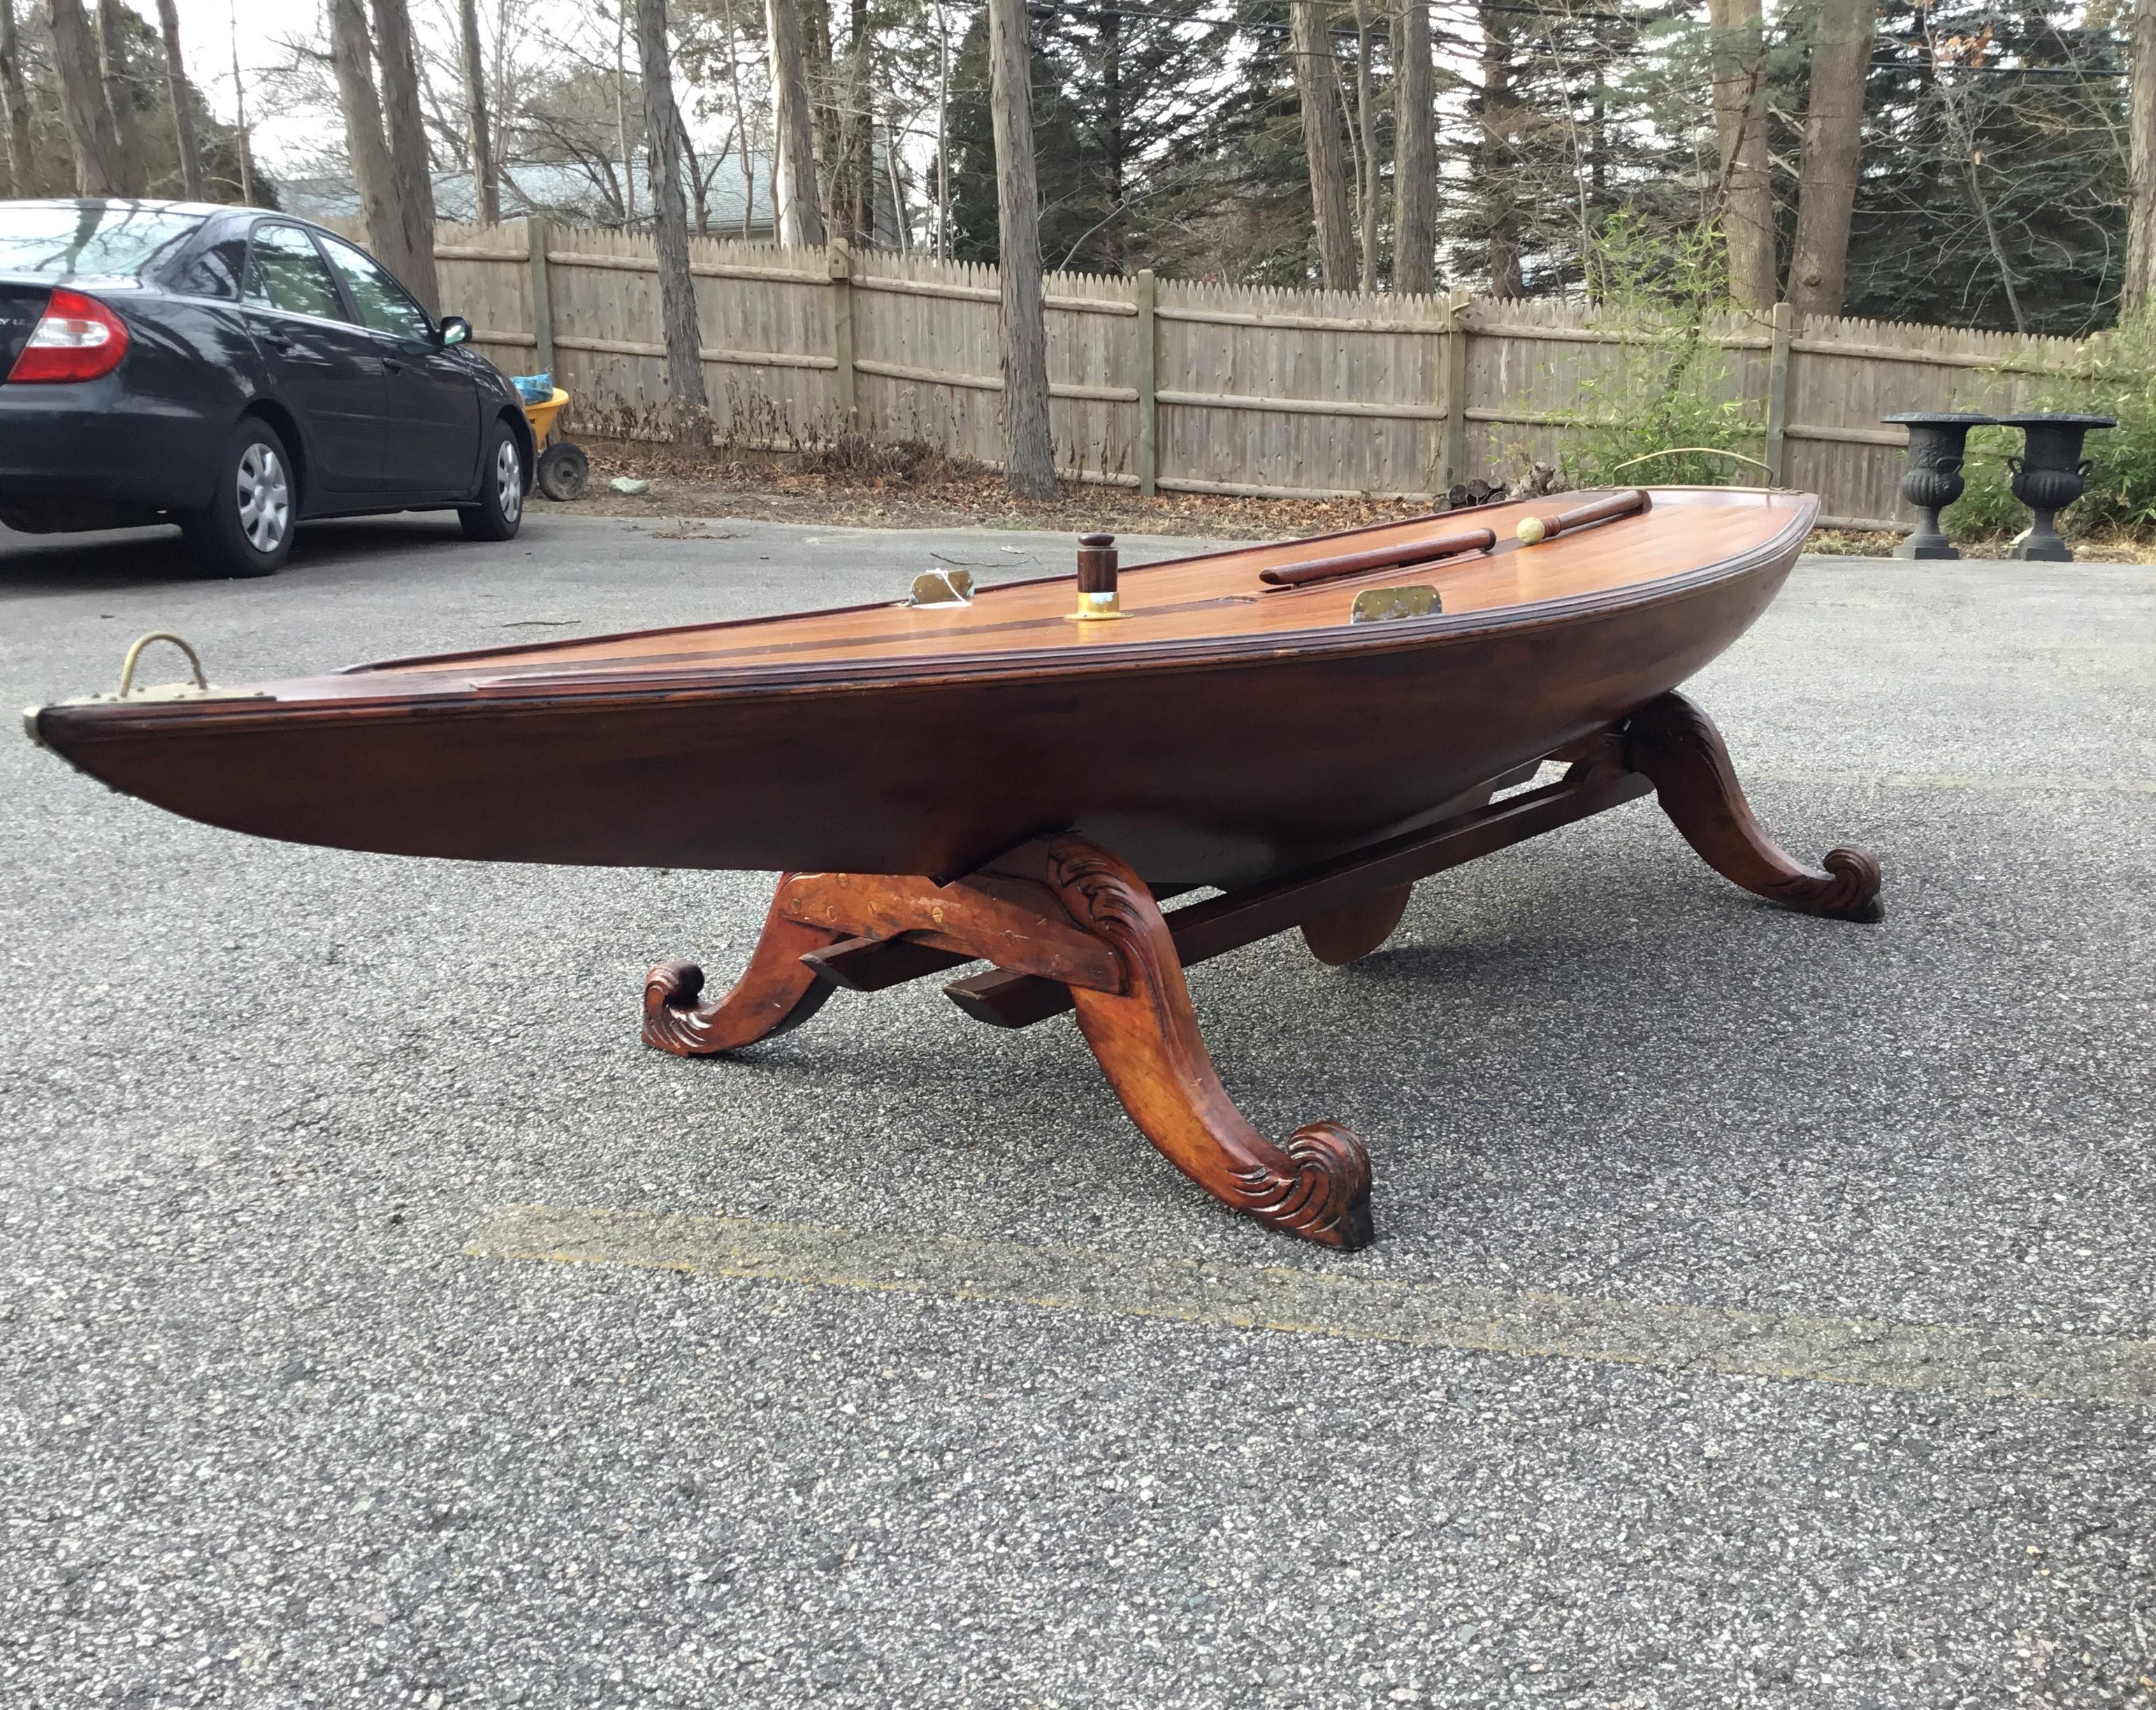 Ten foot vintage yacht model hull with planked deck, dropped keel, mast collar, set into a custom cradle. Perfect for use as a long cocktail table, or raise it to use for dining or a desk. Circa 1890.

Overall dimensions: 120 long by 31 wide by 21